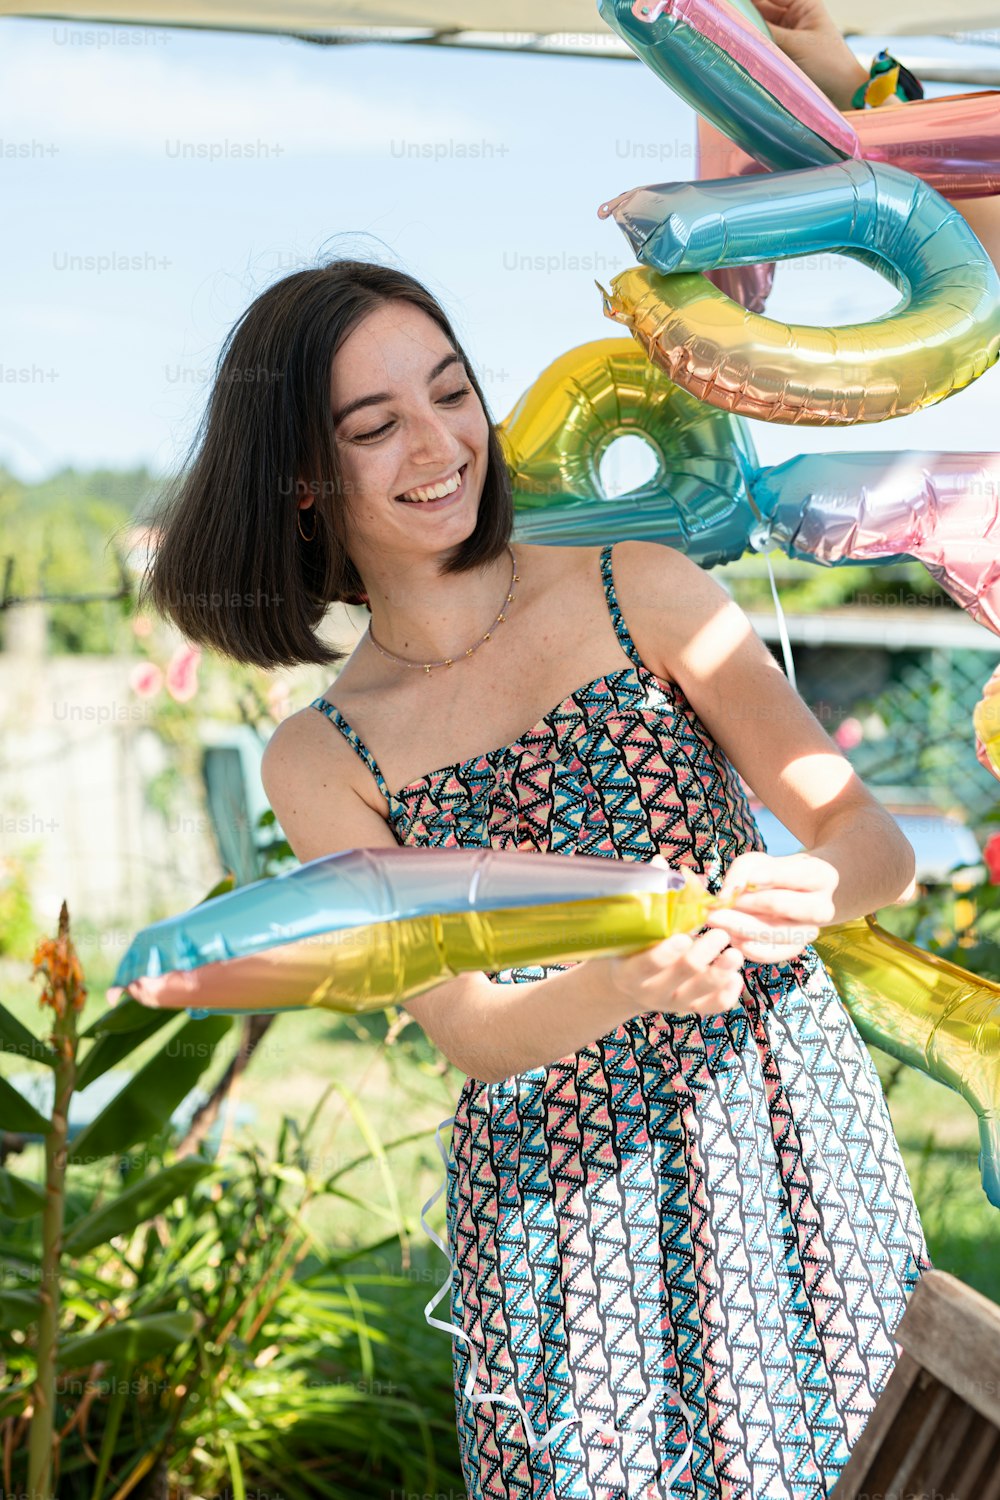 a woman holding a bunch of balloons in her hands